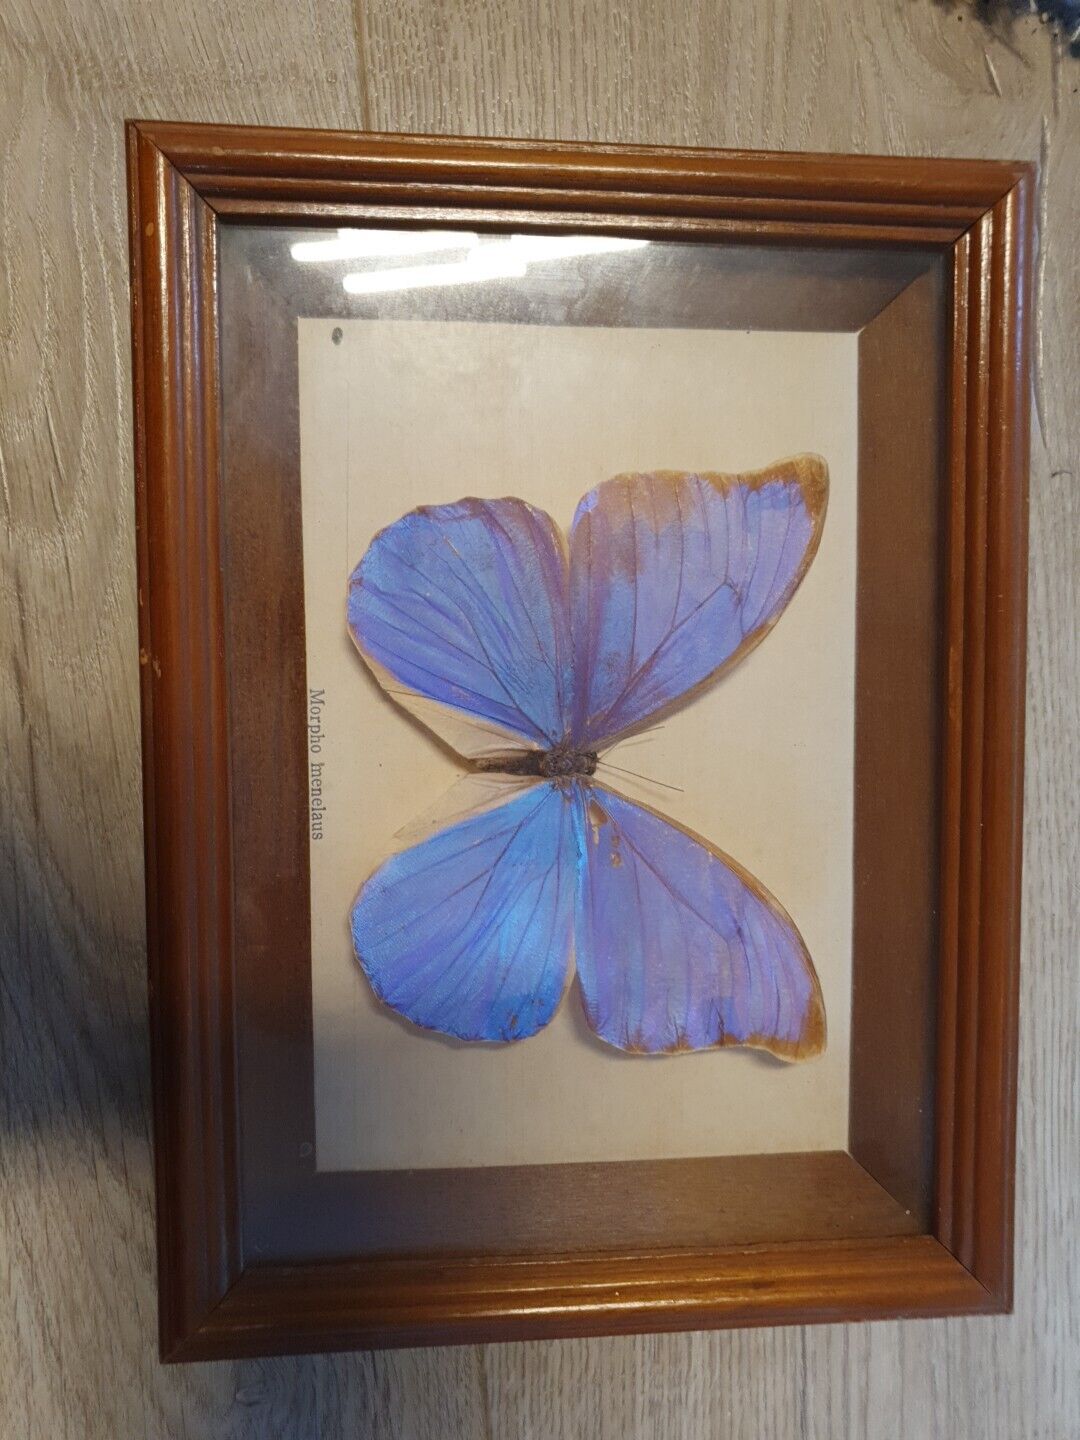 Rare Colour Morpho Menelaus Batterfly With Frame And Glass Display